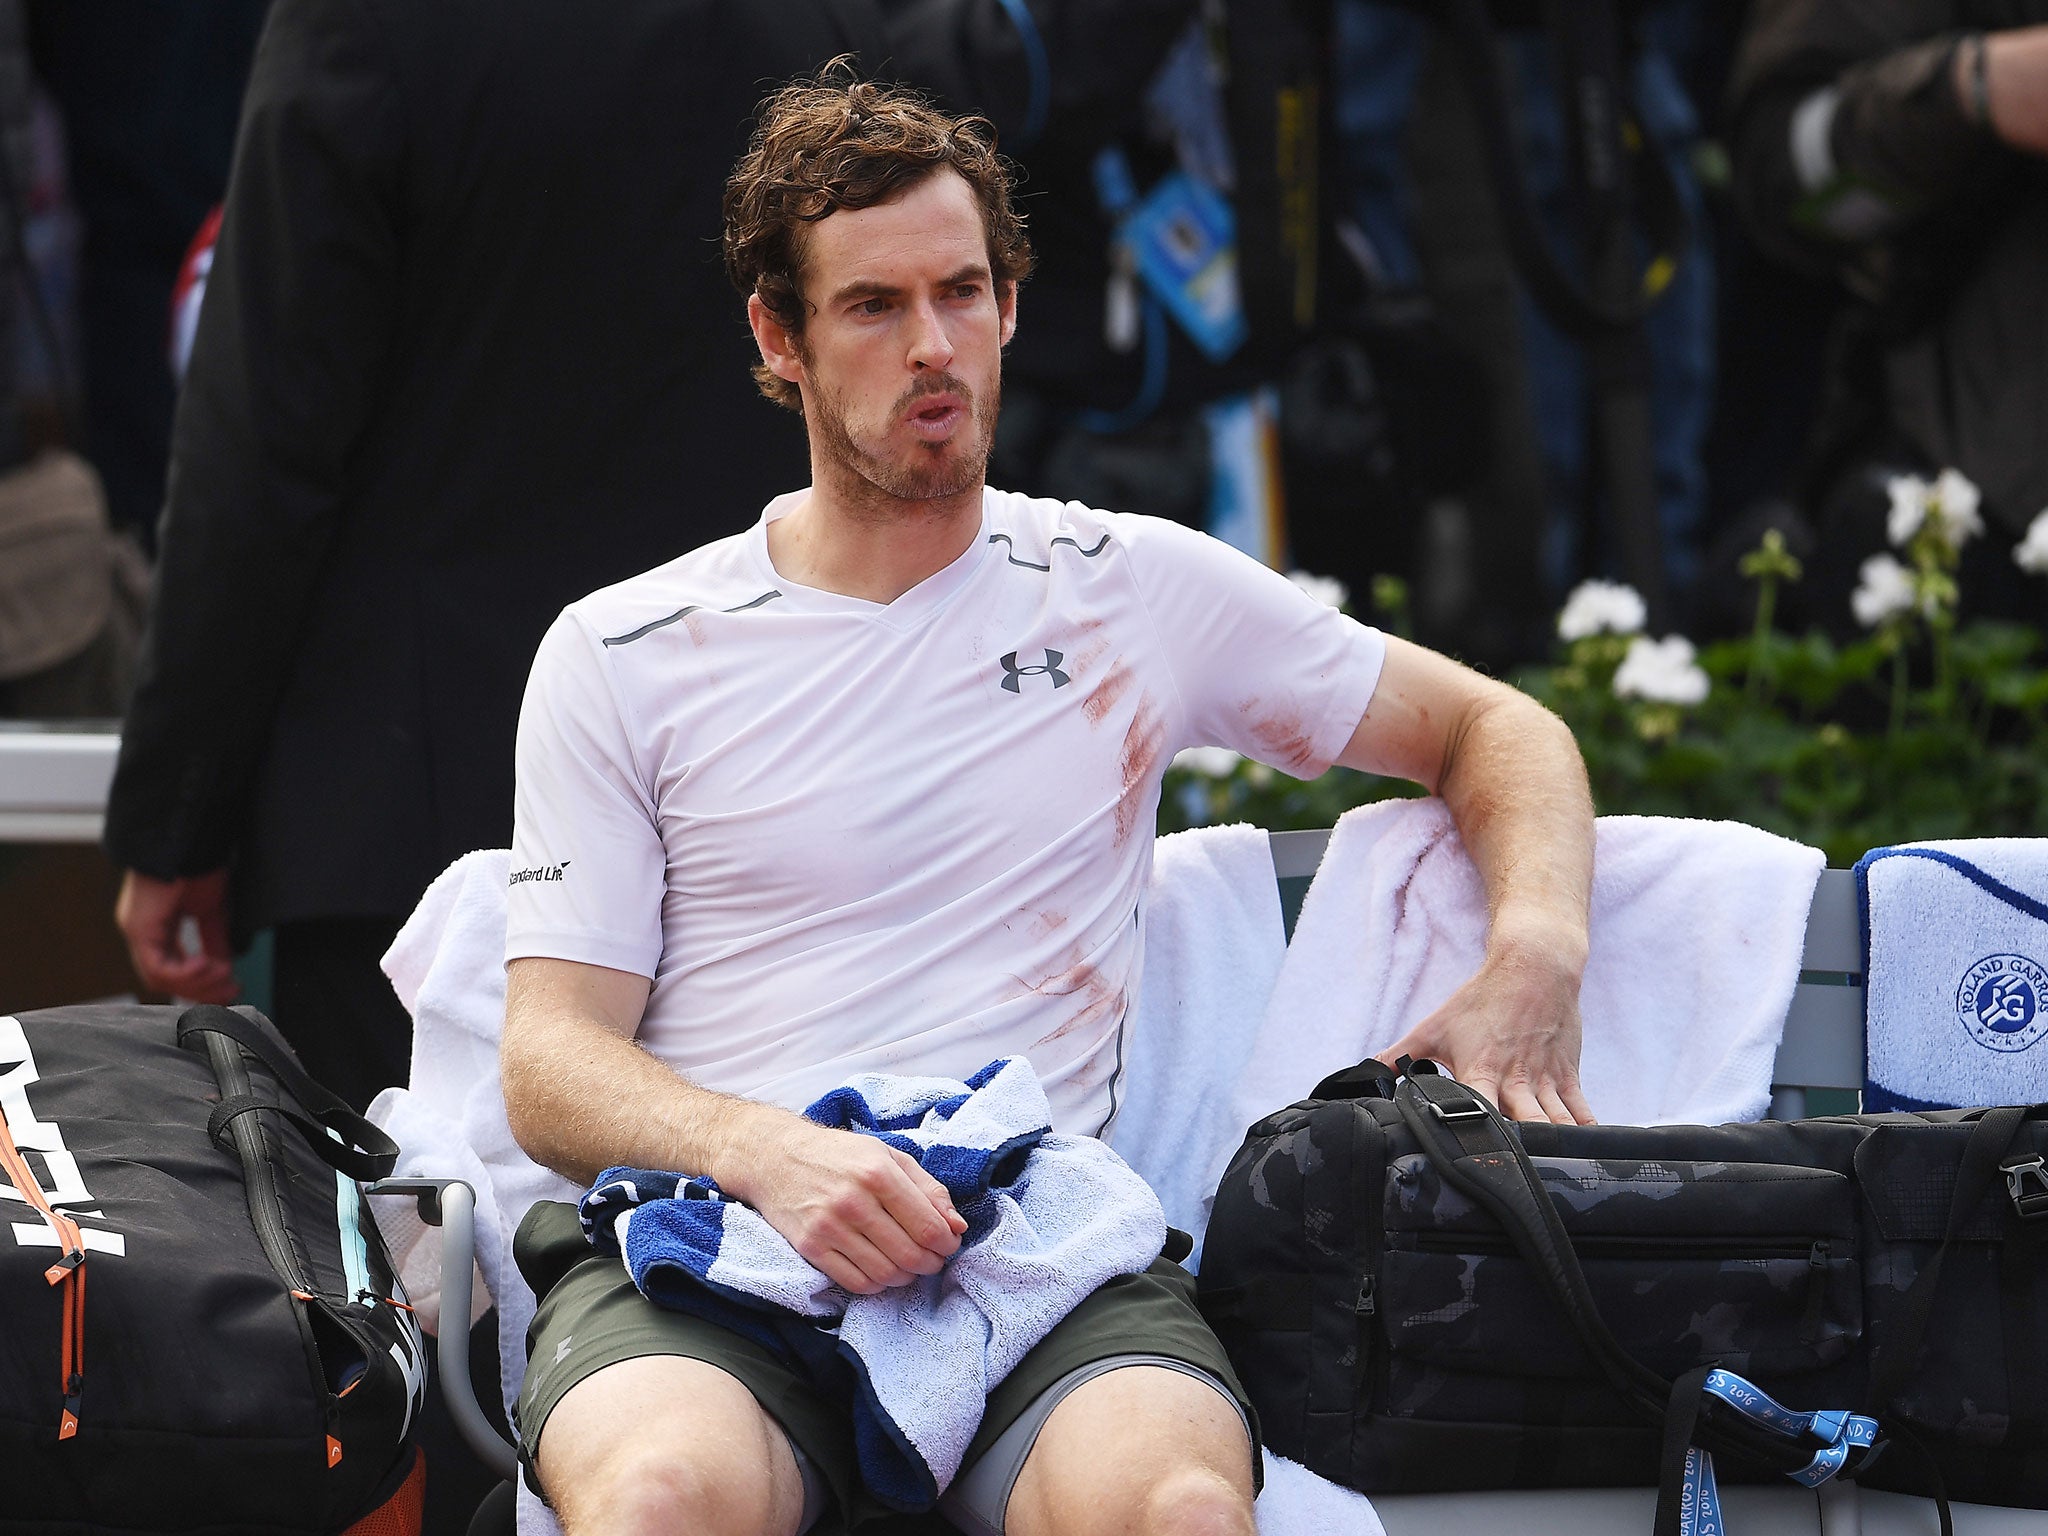 Andy Murray is now involved in a race to be fit for Wimbledon